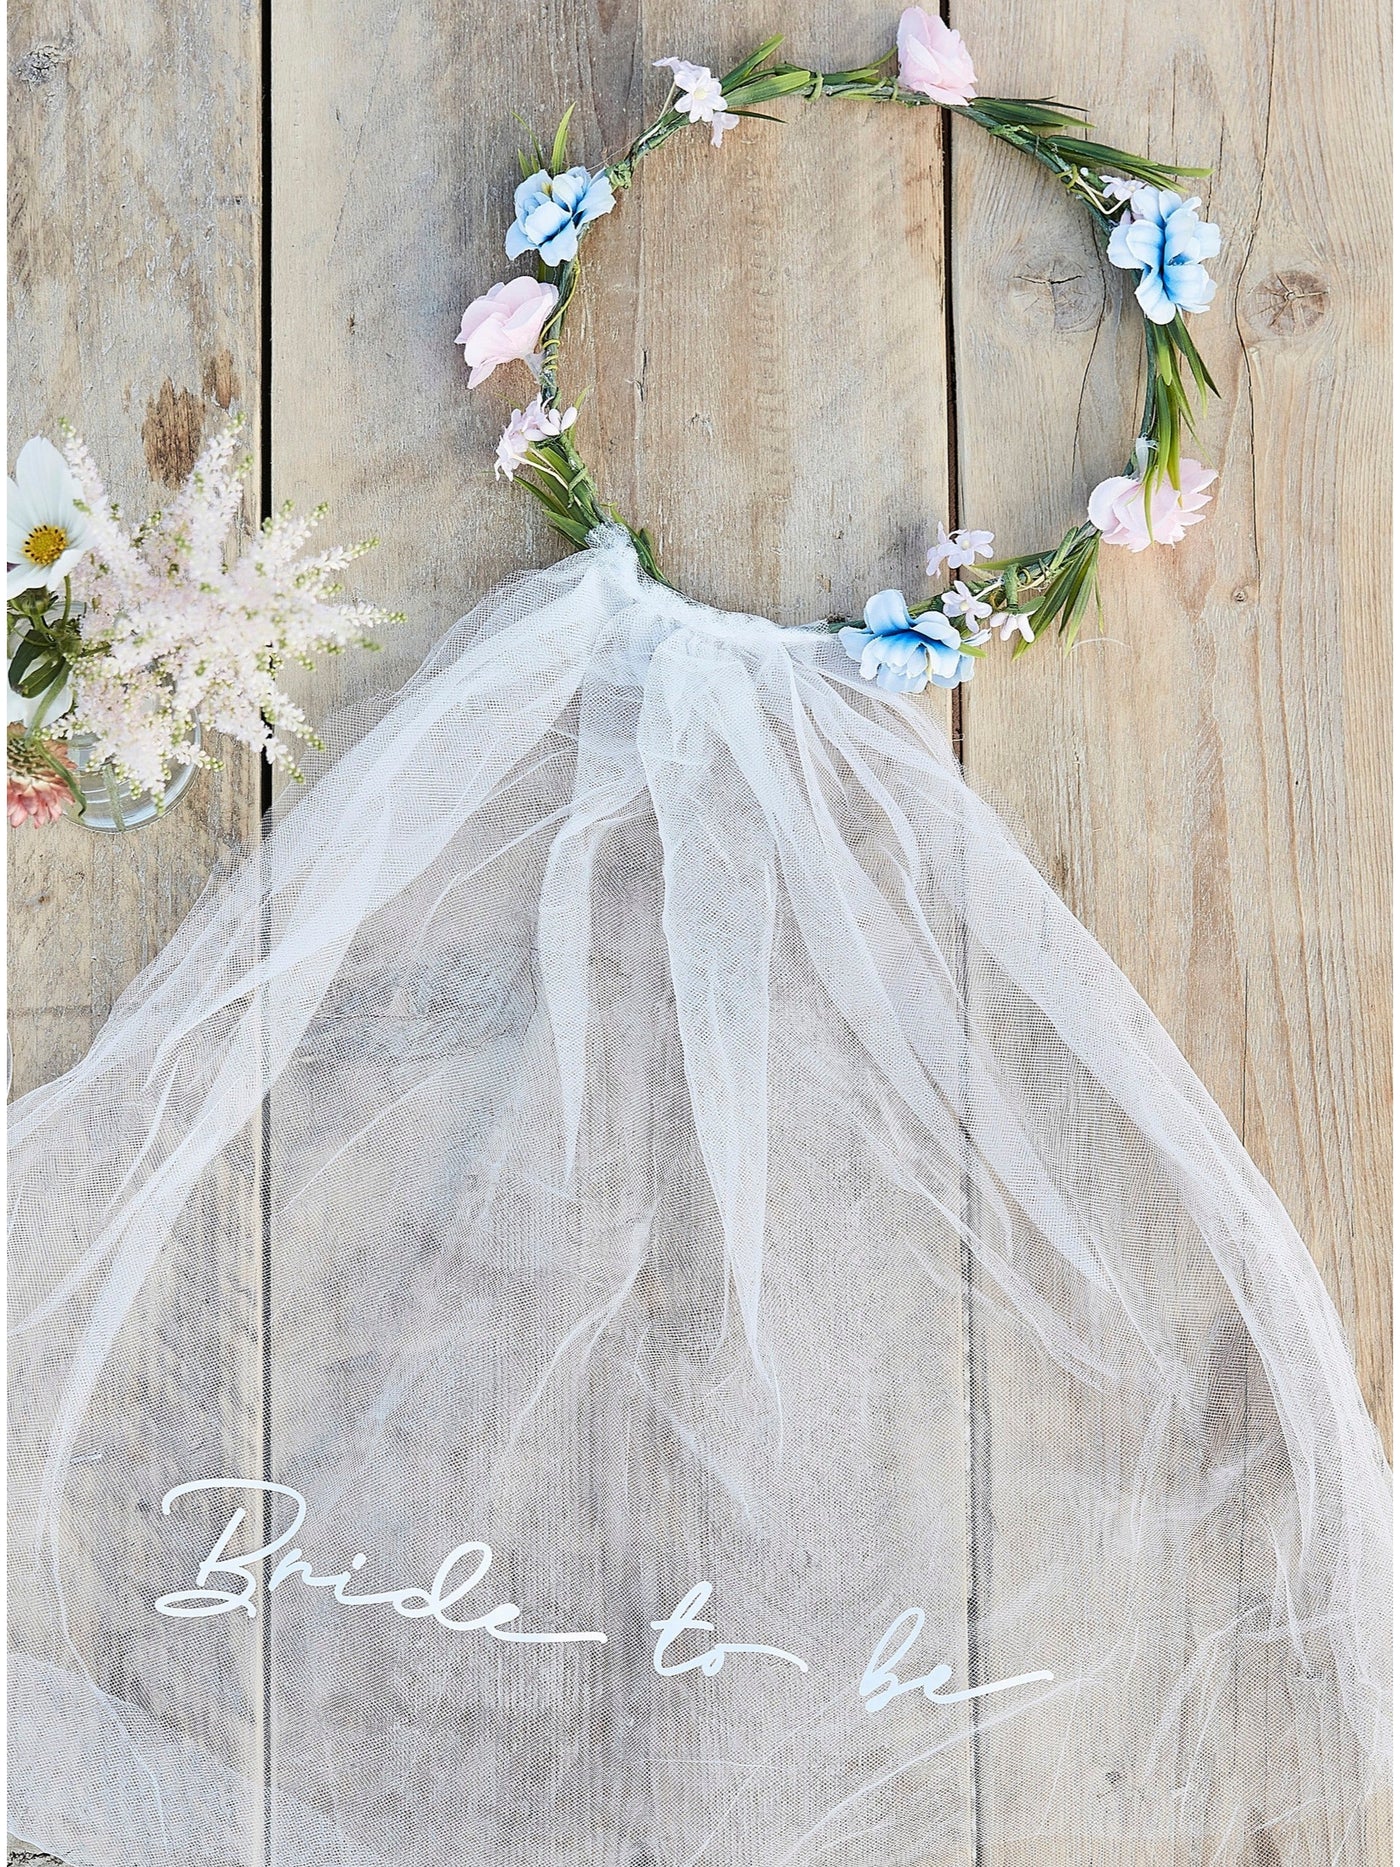 Bride To Be Hen Party Veil with Floral Crown